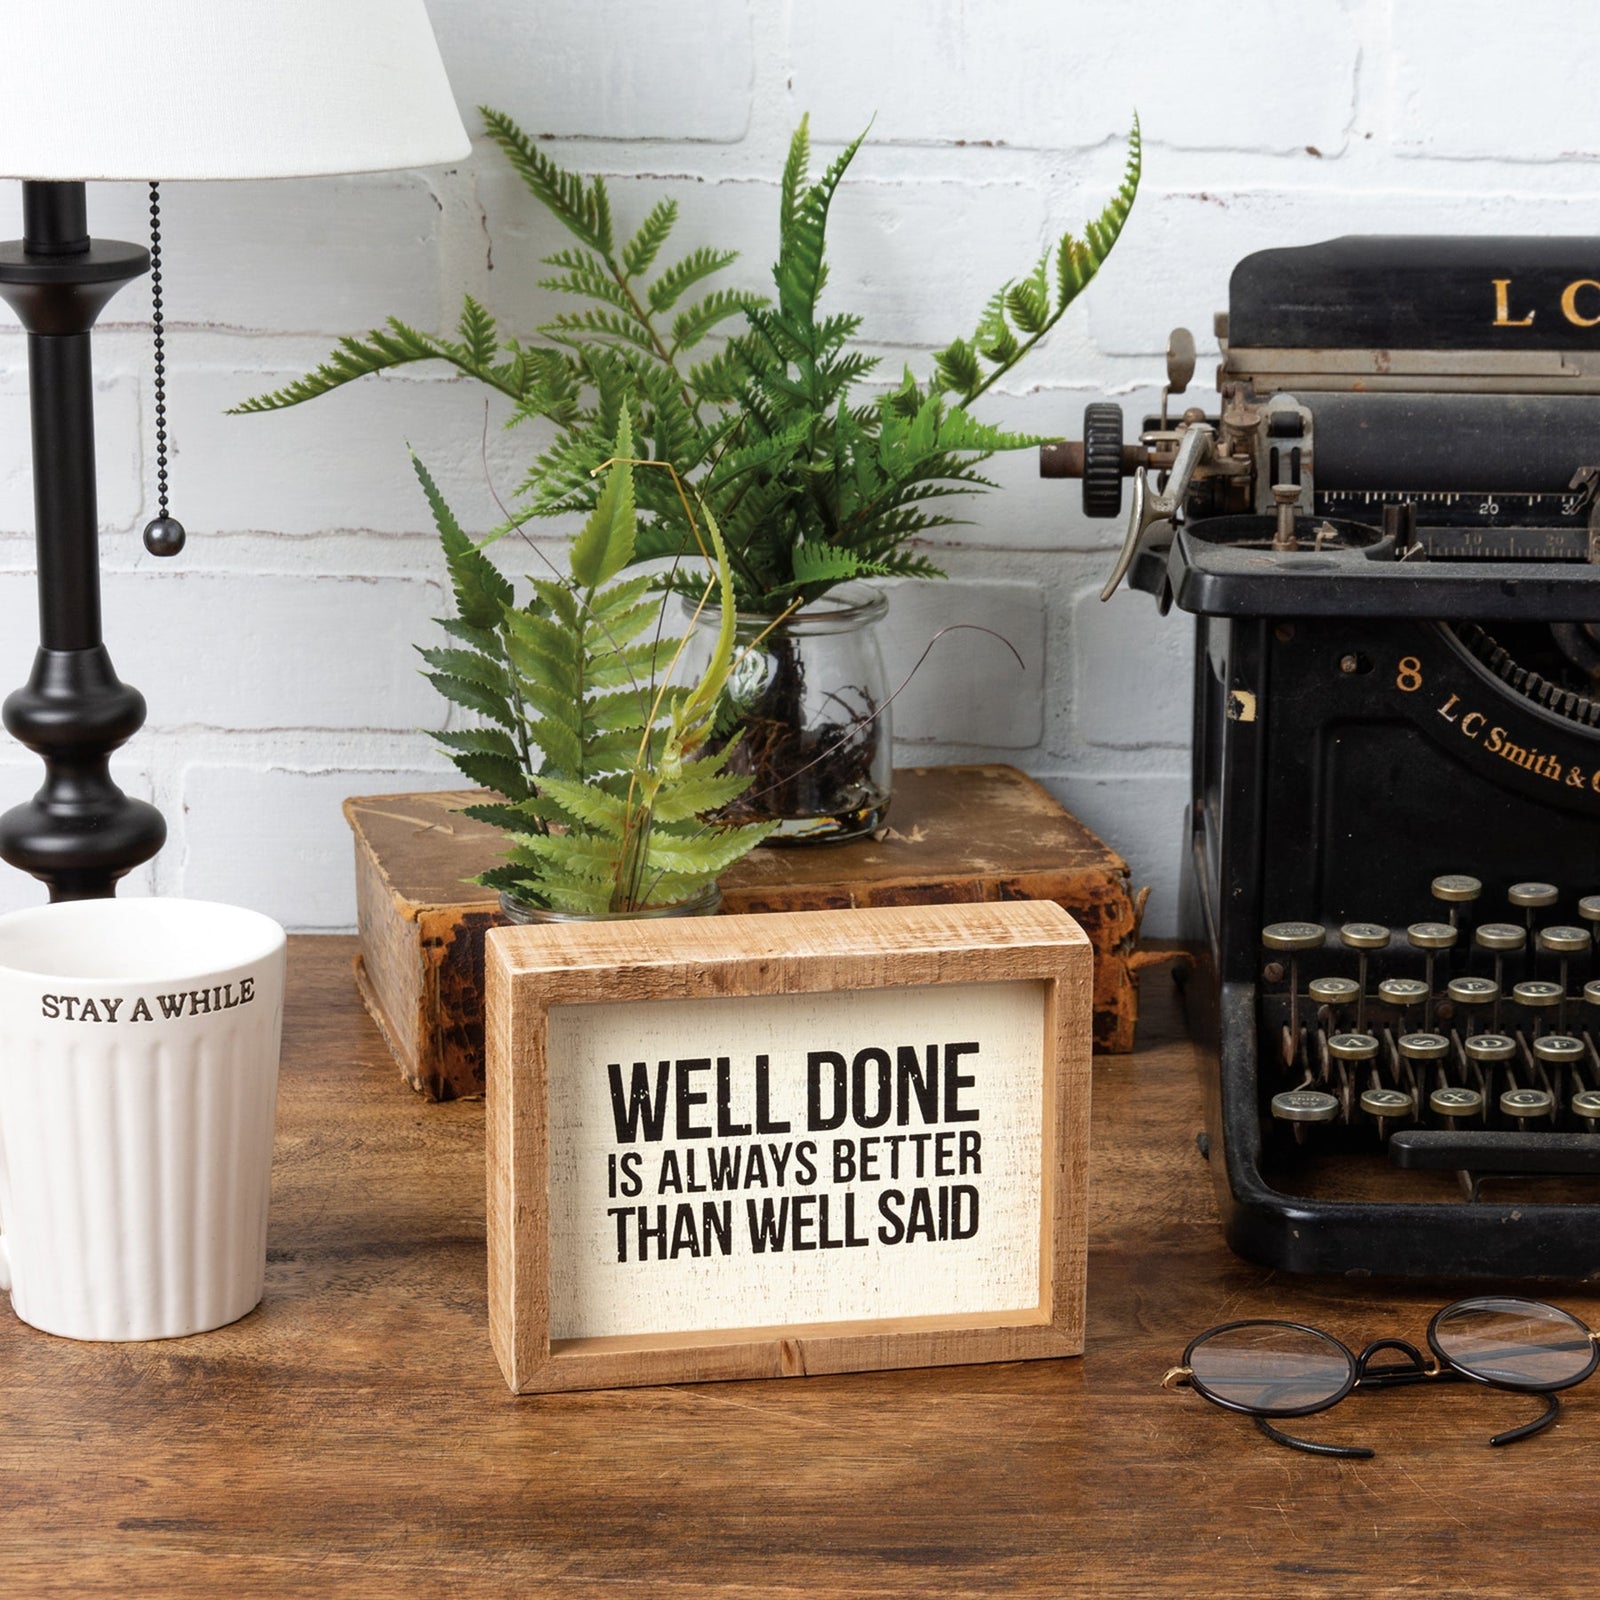 Well Done Better Than Well Said Wooden Inset Box Sign | Rustic Farmhouse